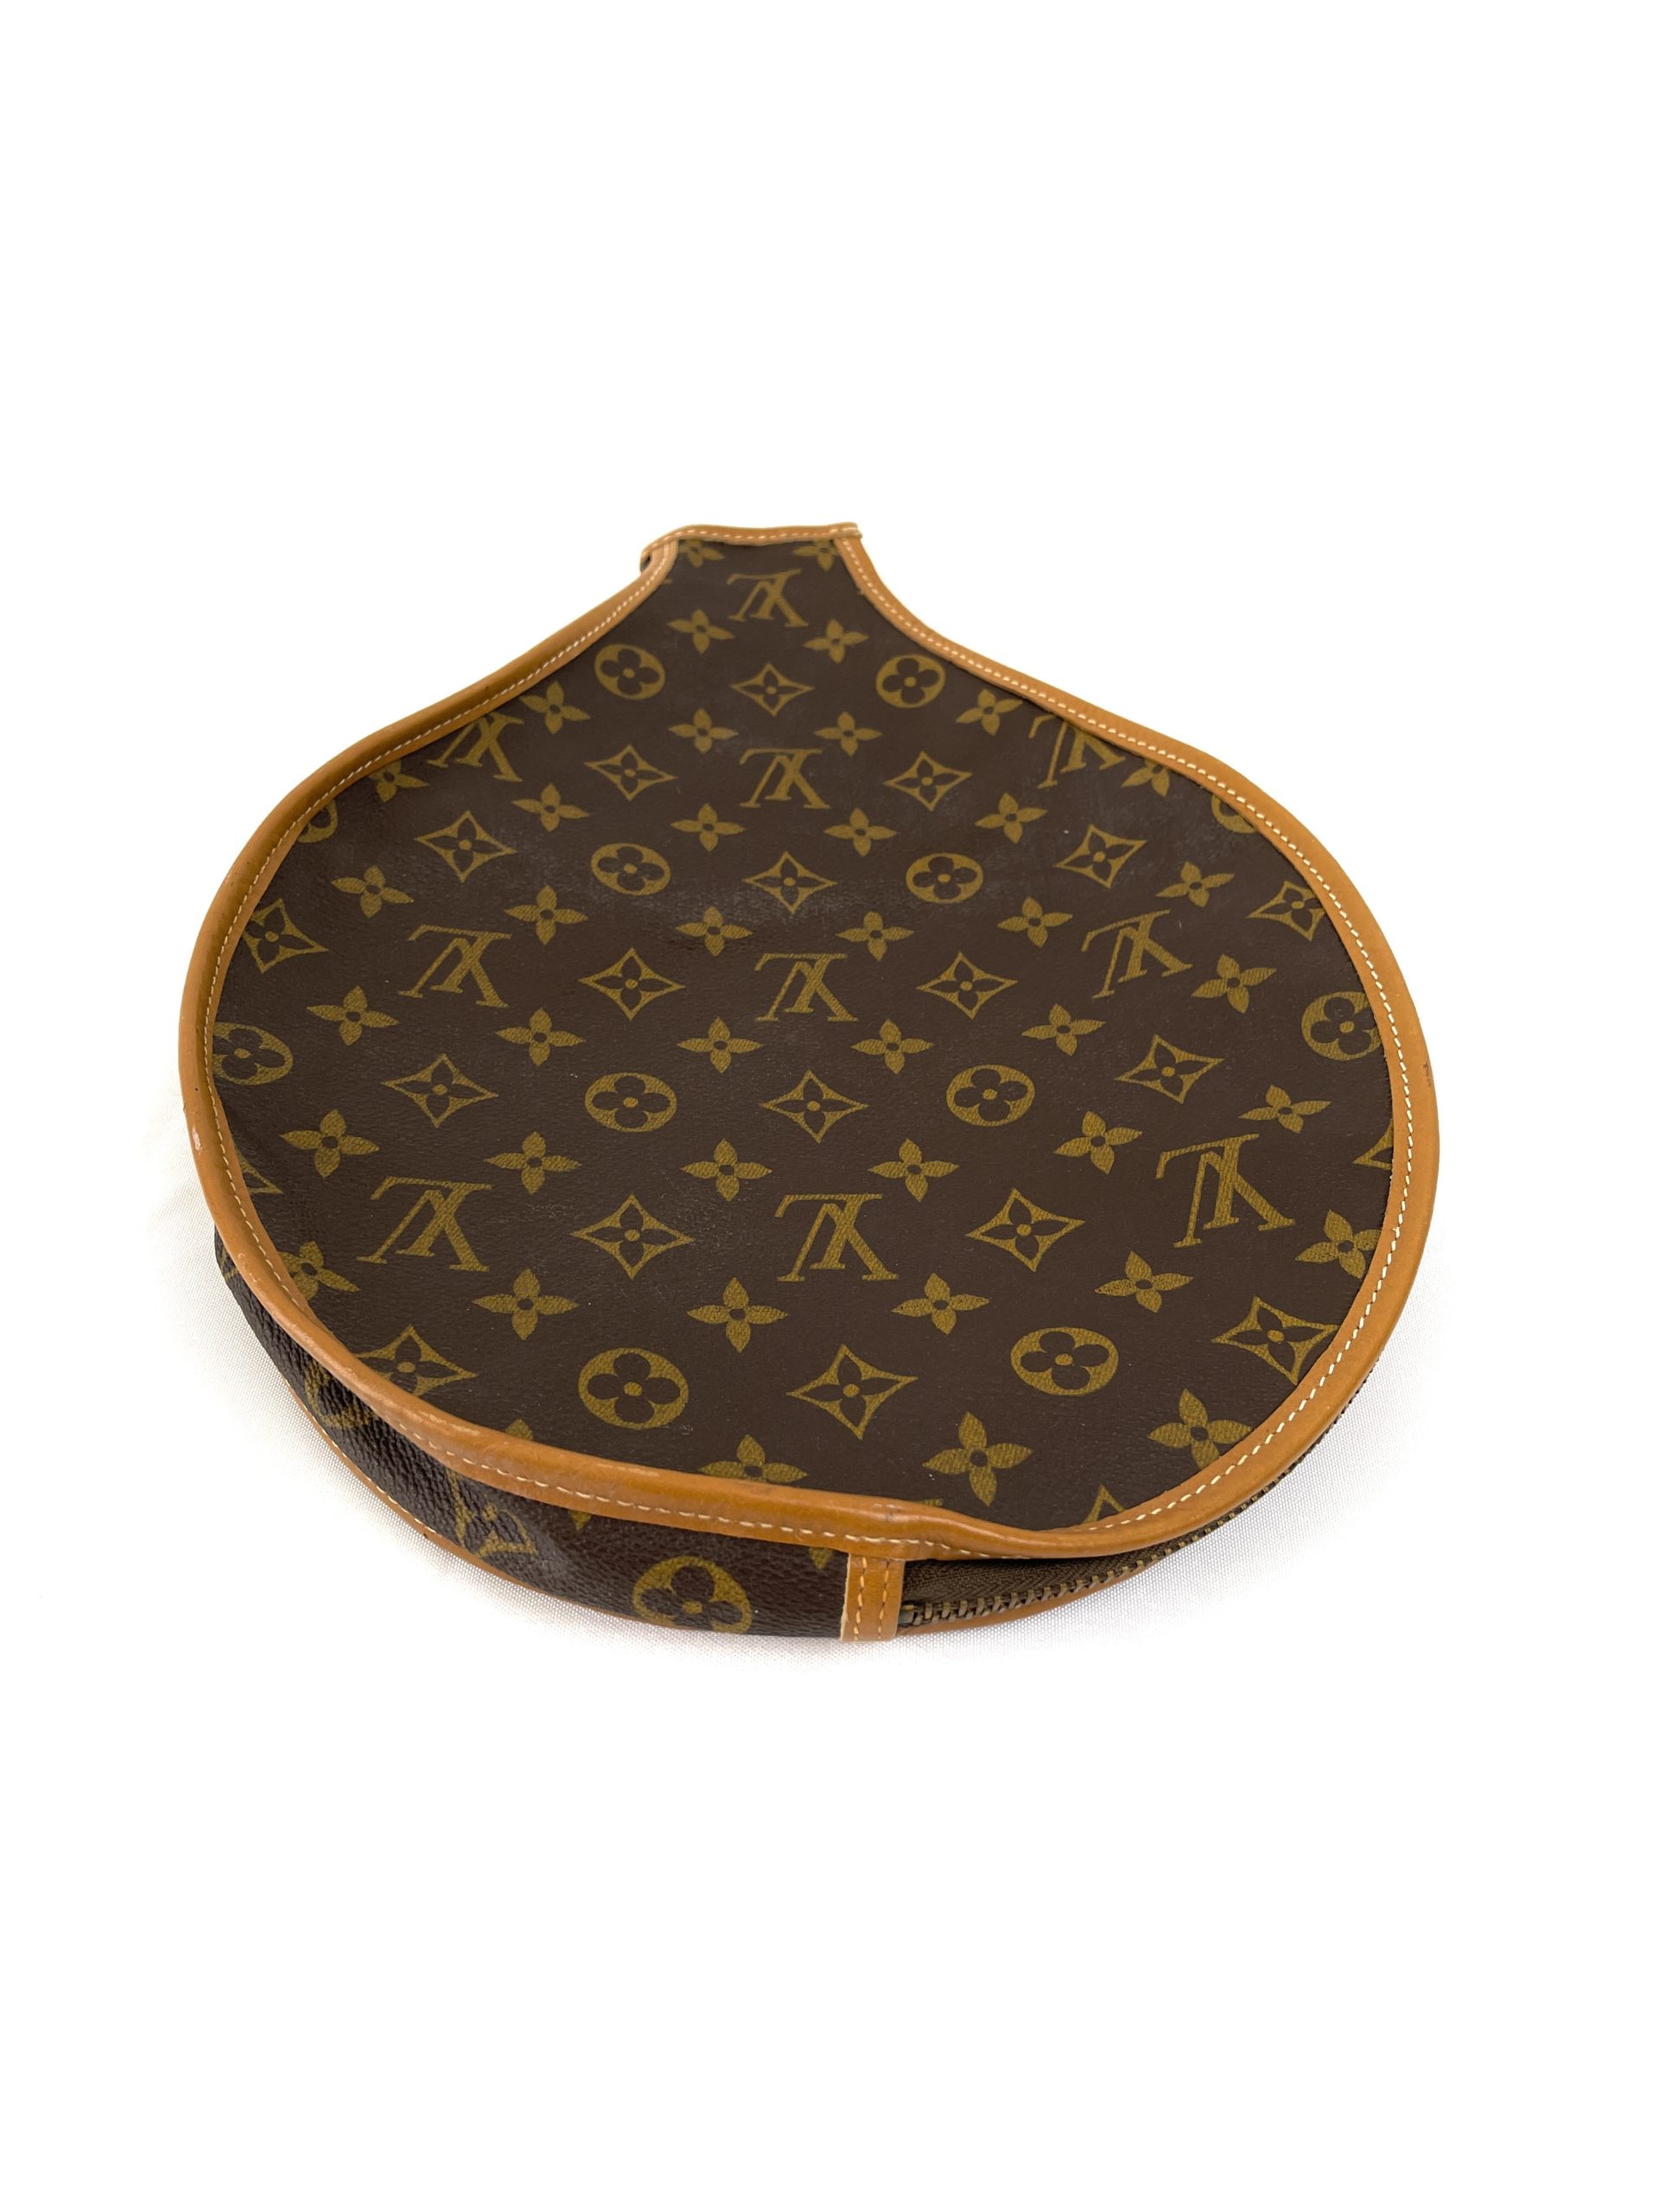 Vintage Louis Vuitton Monogram Canvas Tennis Racket Cover French Company  Rare at 1stDibs